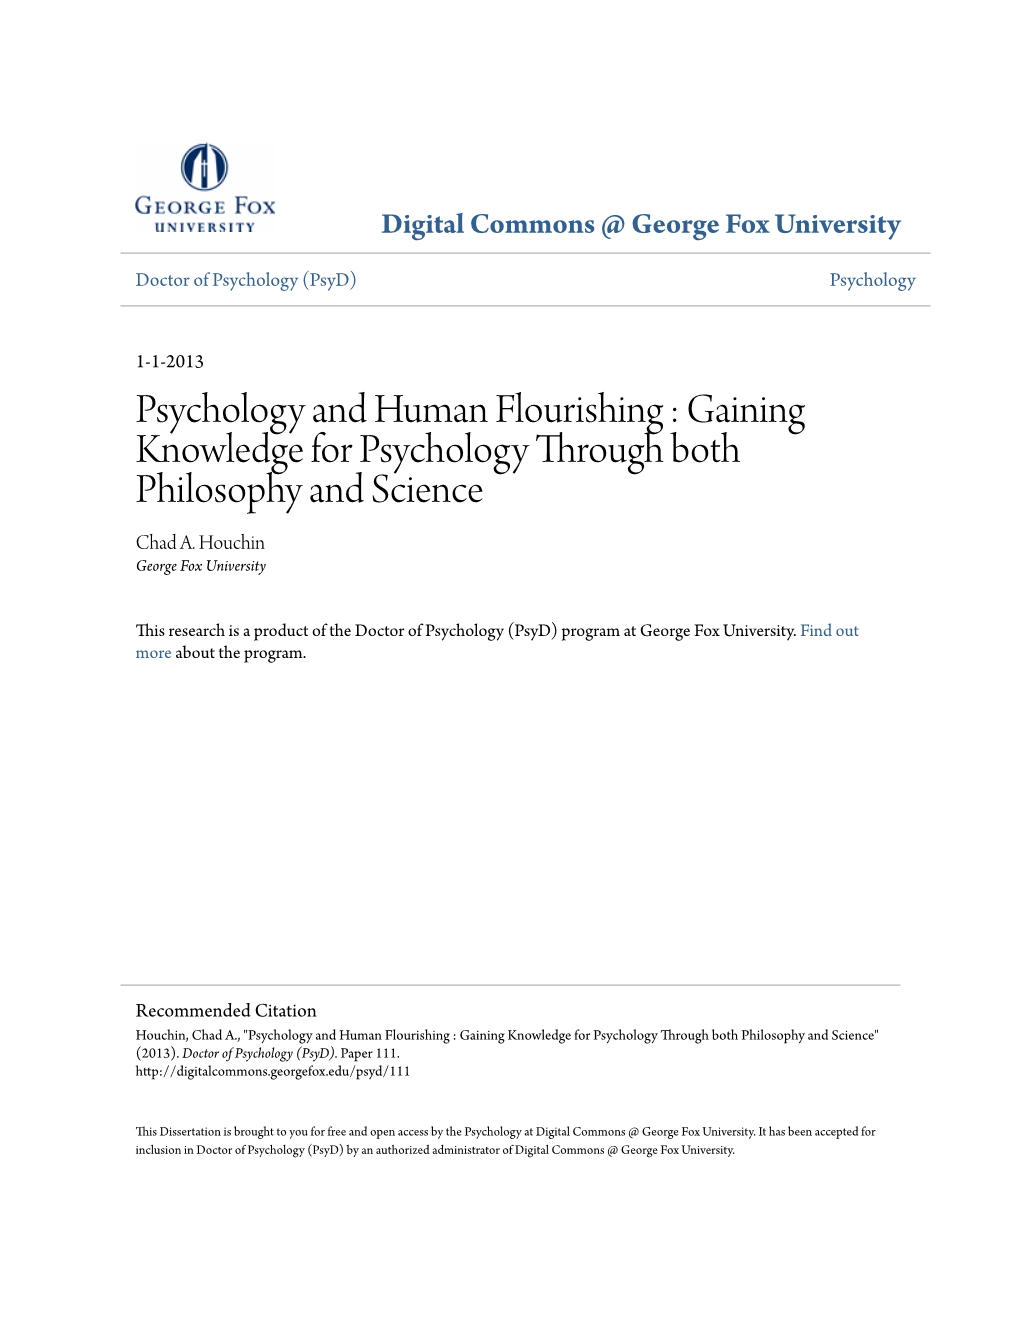 Psychology and Human Flourishing : Gaining Knowledge for Psychology Through Both Philosophy and Science Chad A